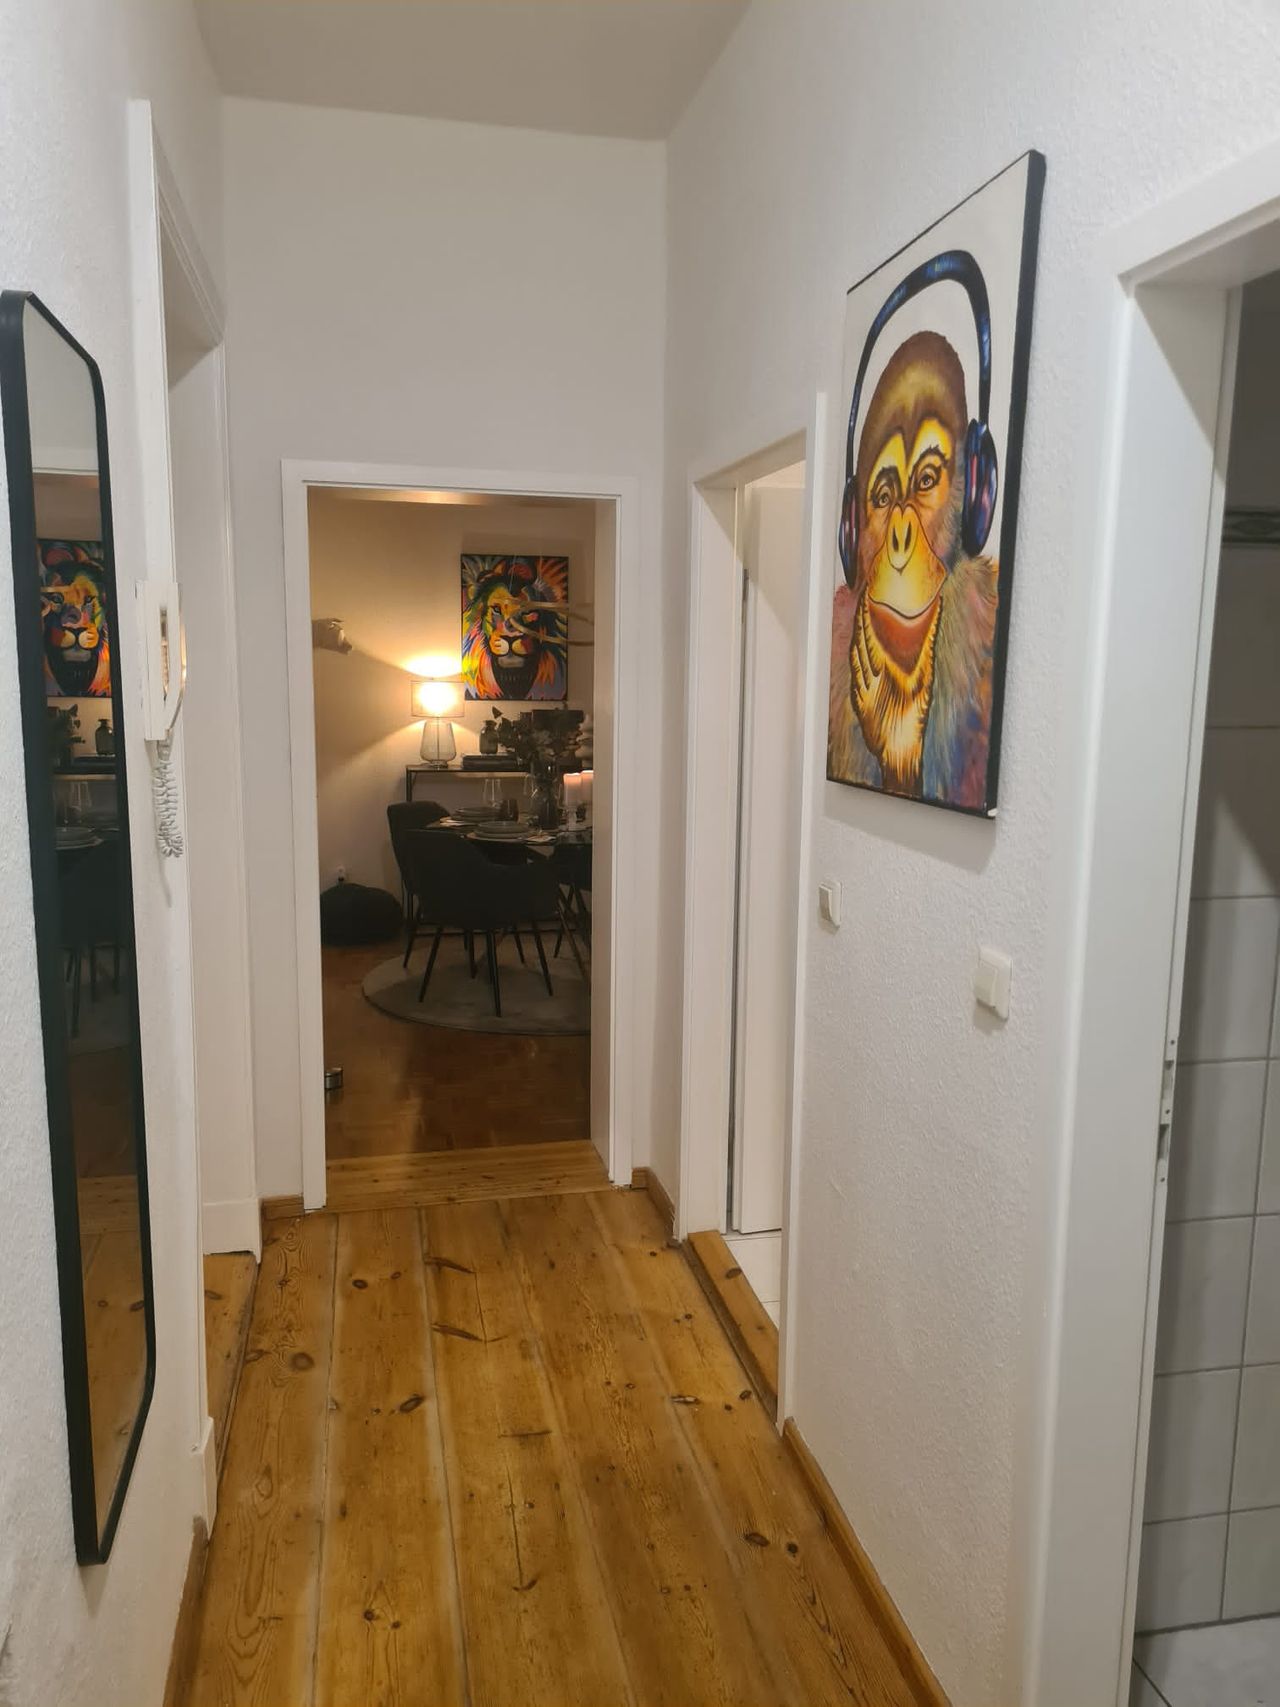 Great opportunity in Friedrichshain! Newly renovated 60 sqm apartment is looking for the perfect tenant.